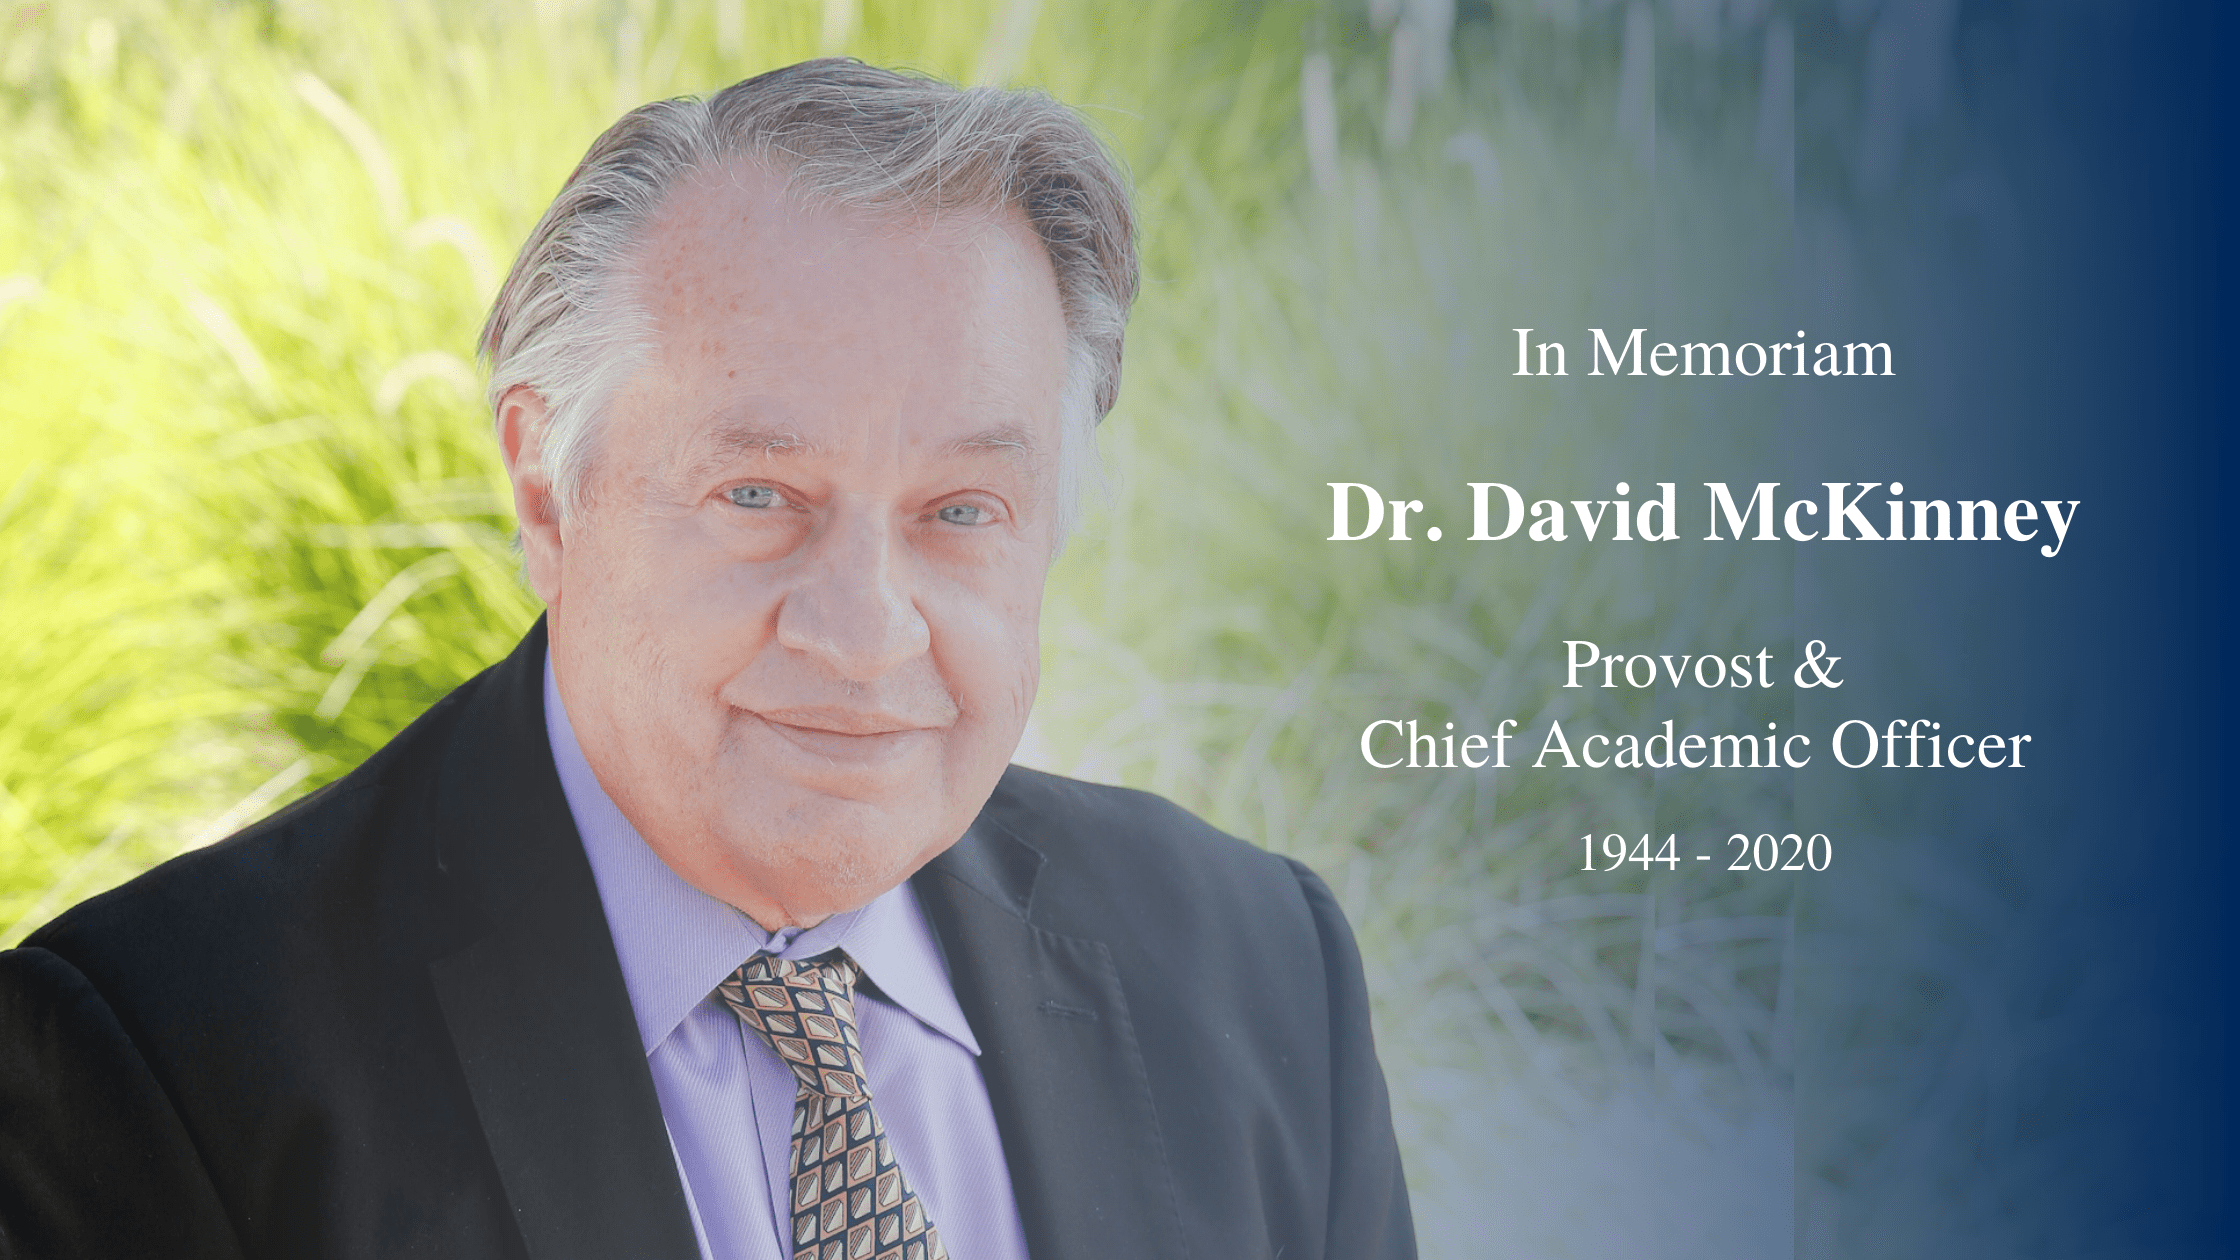 Westcliff University mourns the sudden passing of Provost and Chief Academic Officer, Dr. David McKinney